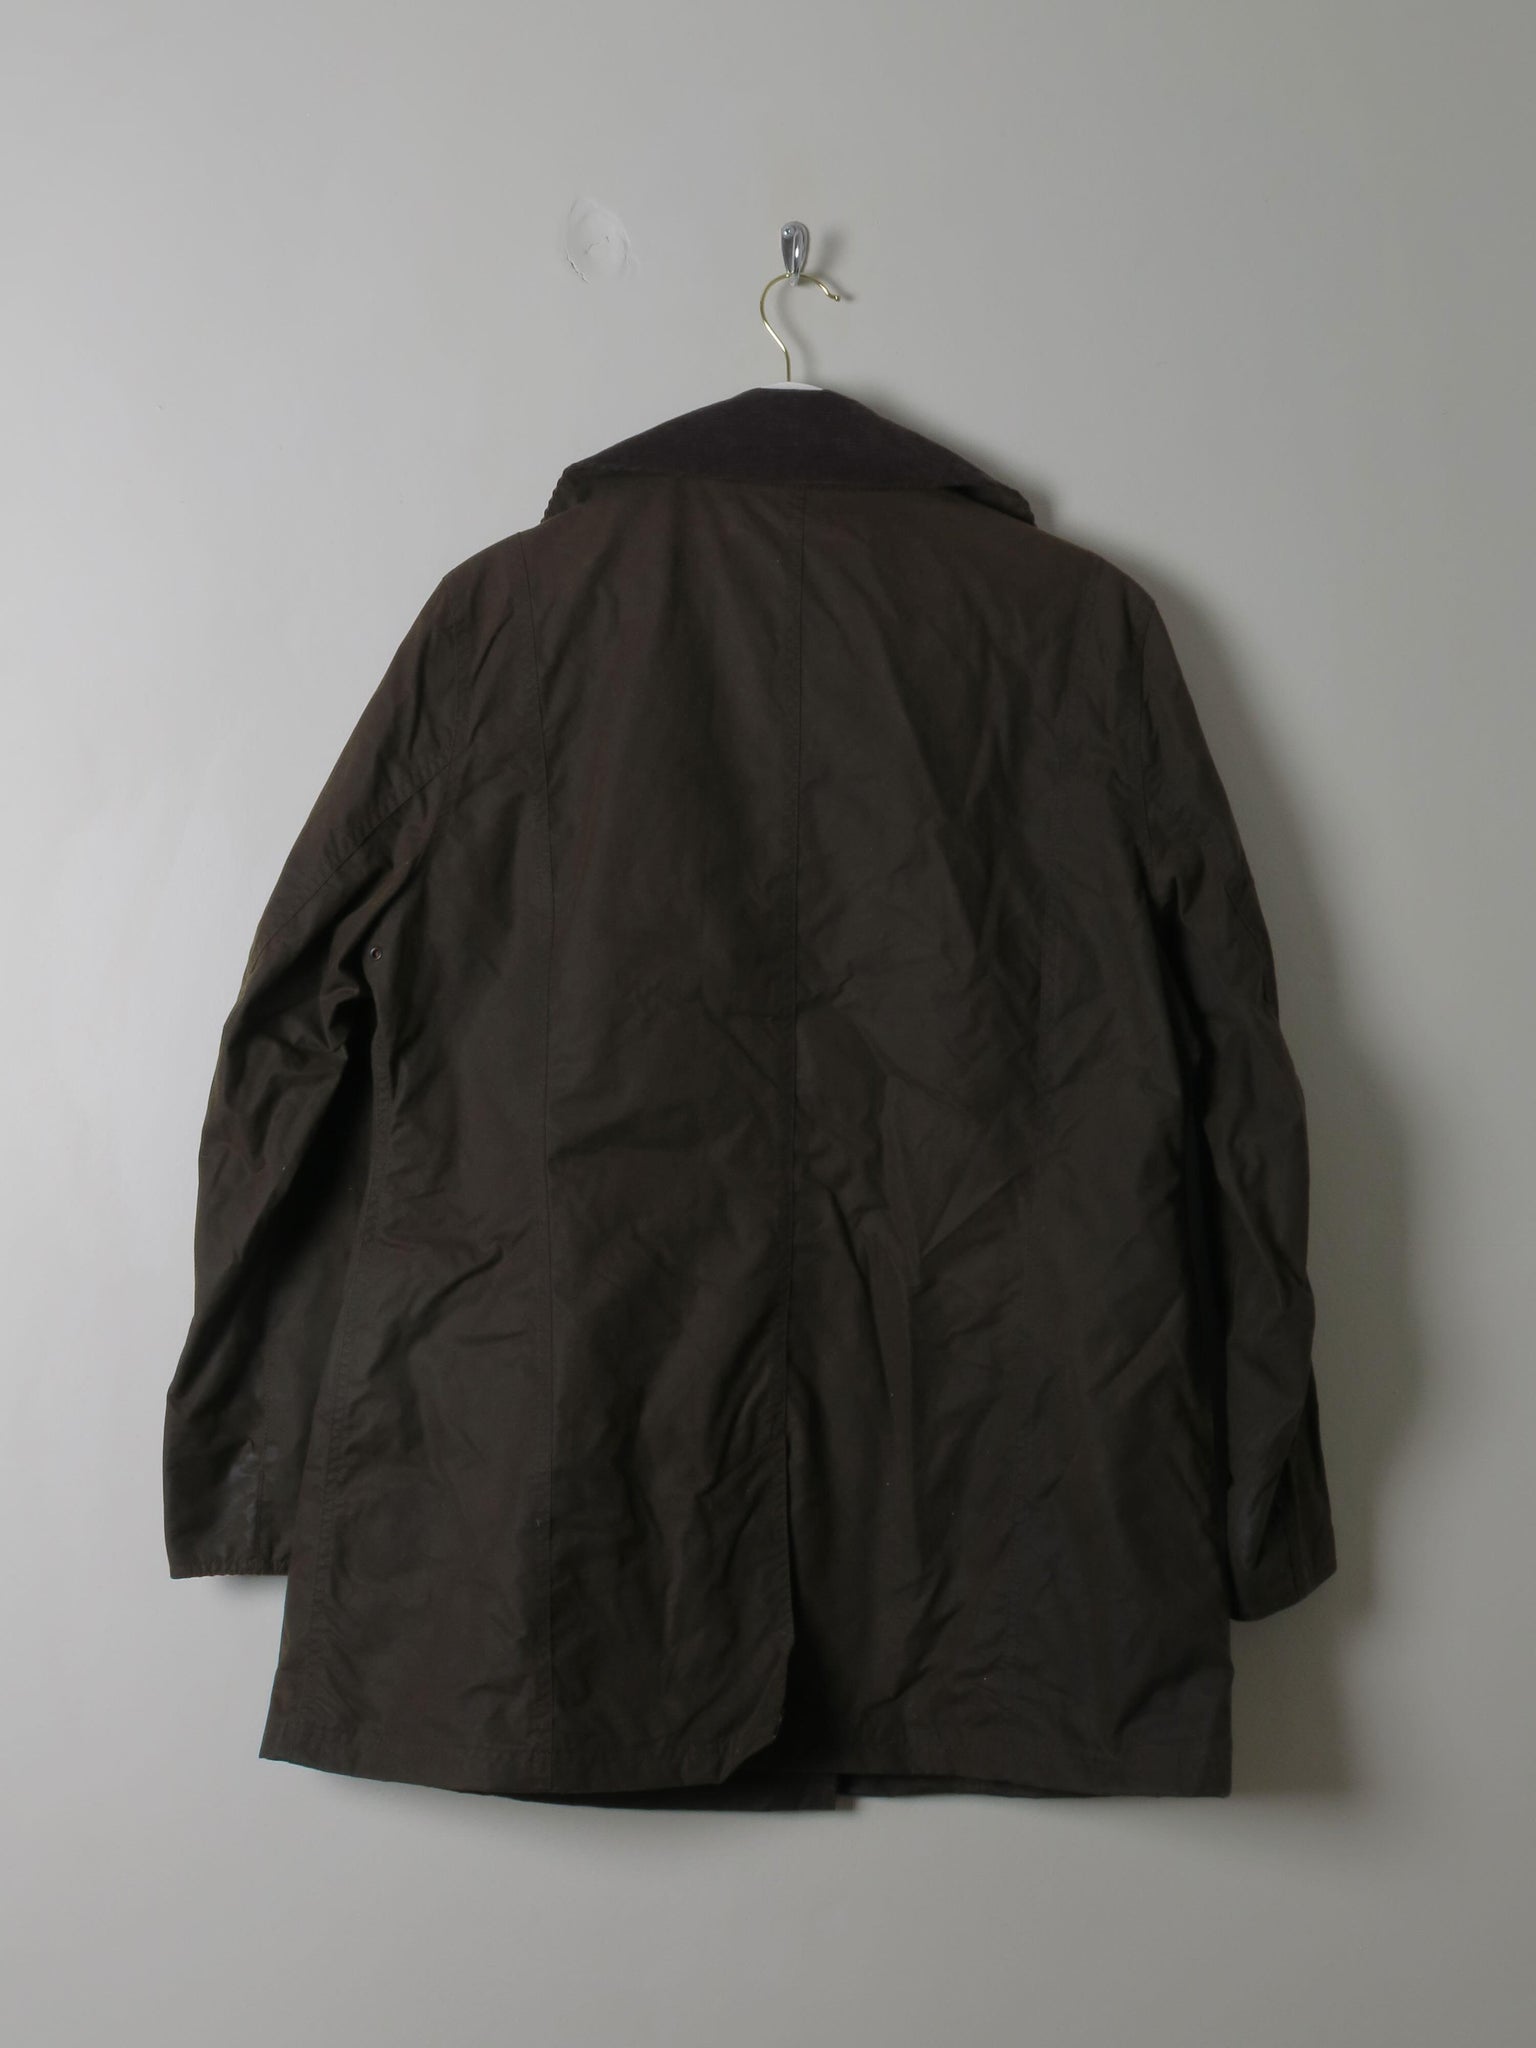 Women's Barbour Waxed Jacket 16 - The Harlequin